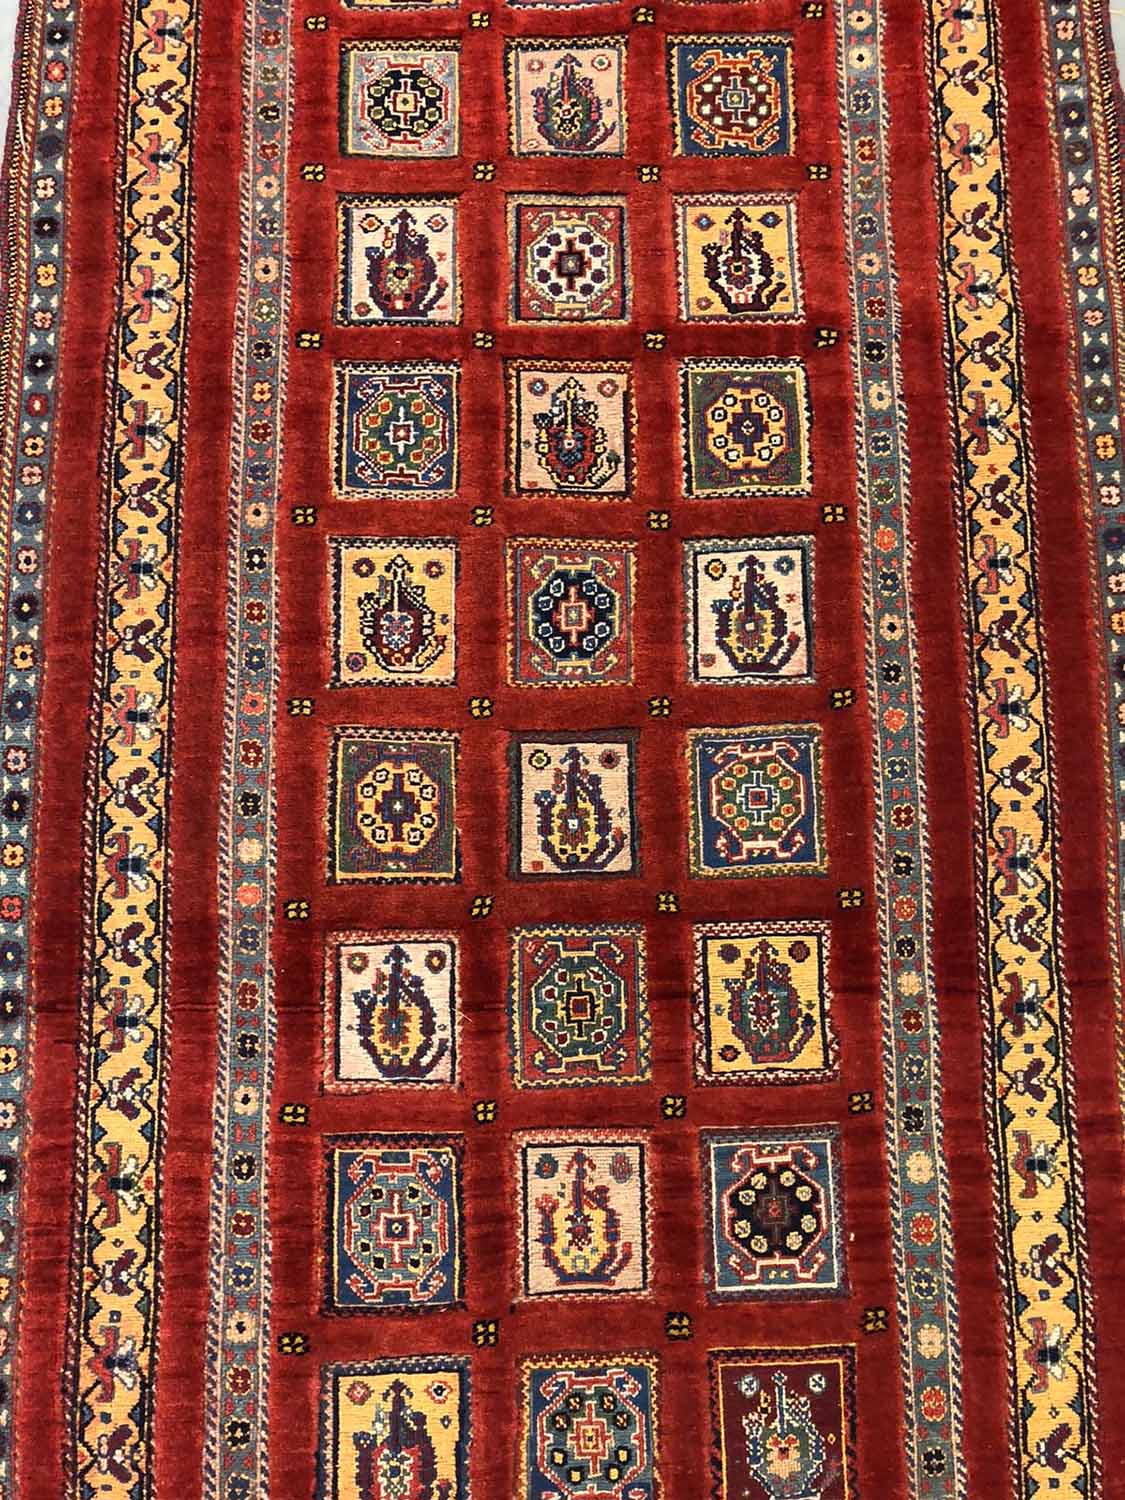 FINE PERSIAN QASHQAI RUNNER, 308cm x 84cm, repeat square medallions within matching borders. - Image 2 of 4